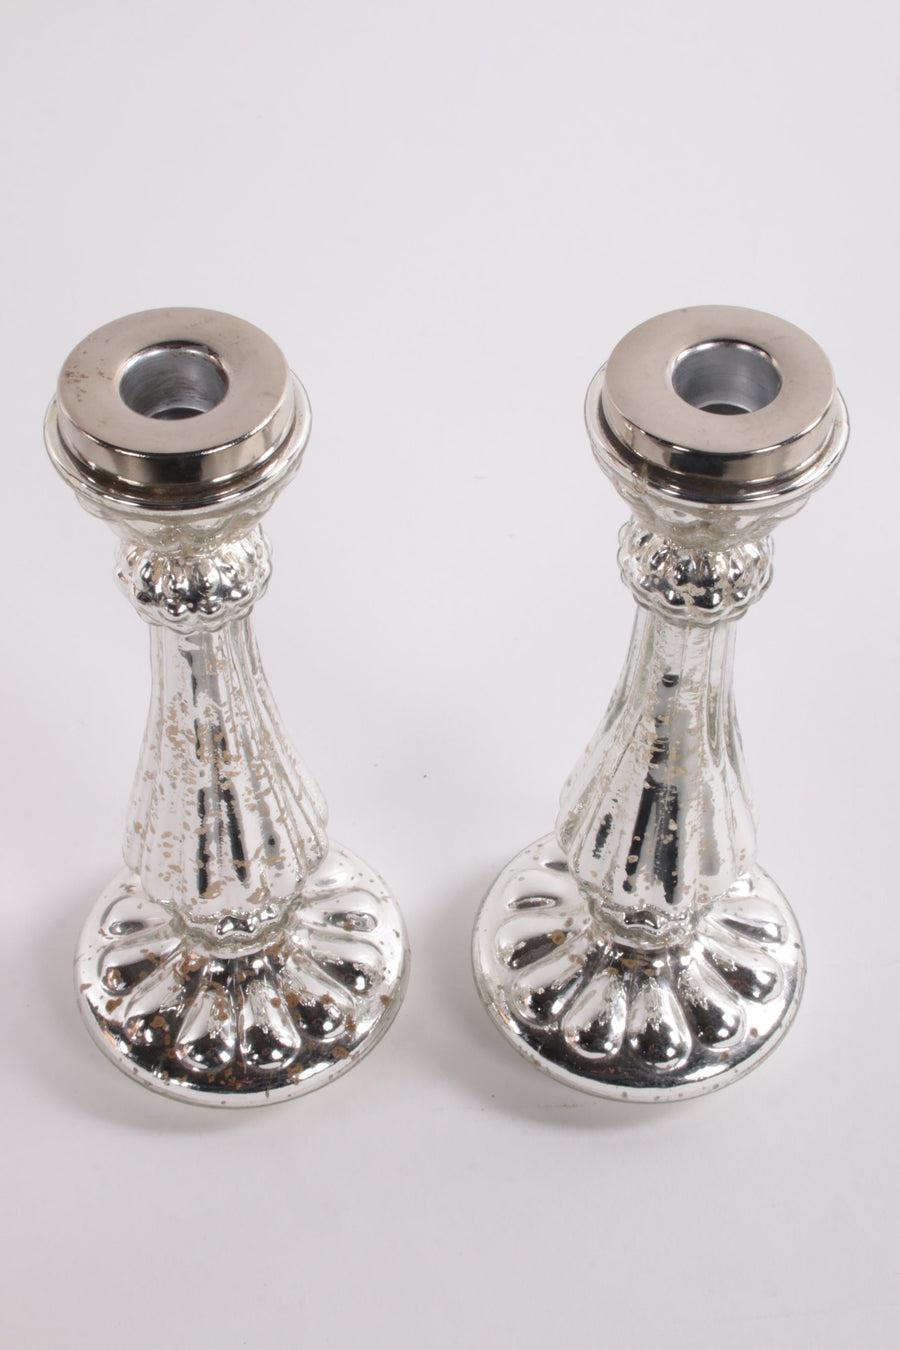  2 Silver Glass Candlesticks

Additional information: 
Dimensions: 10 W x 23 H cm 
Period of Time: 1969
Country of origin: France
Condition: New
